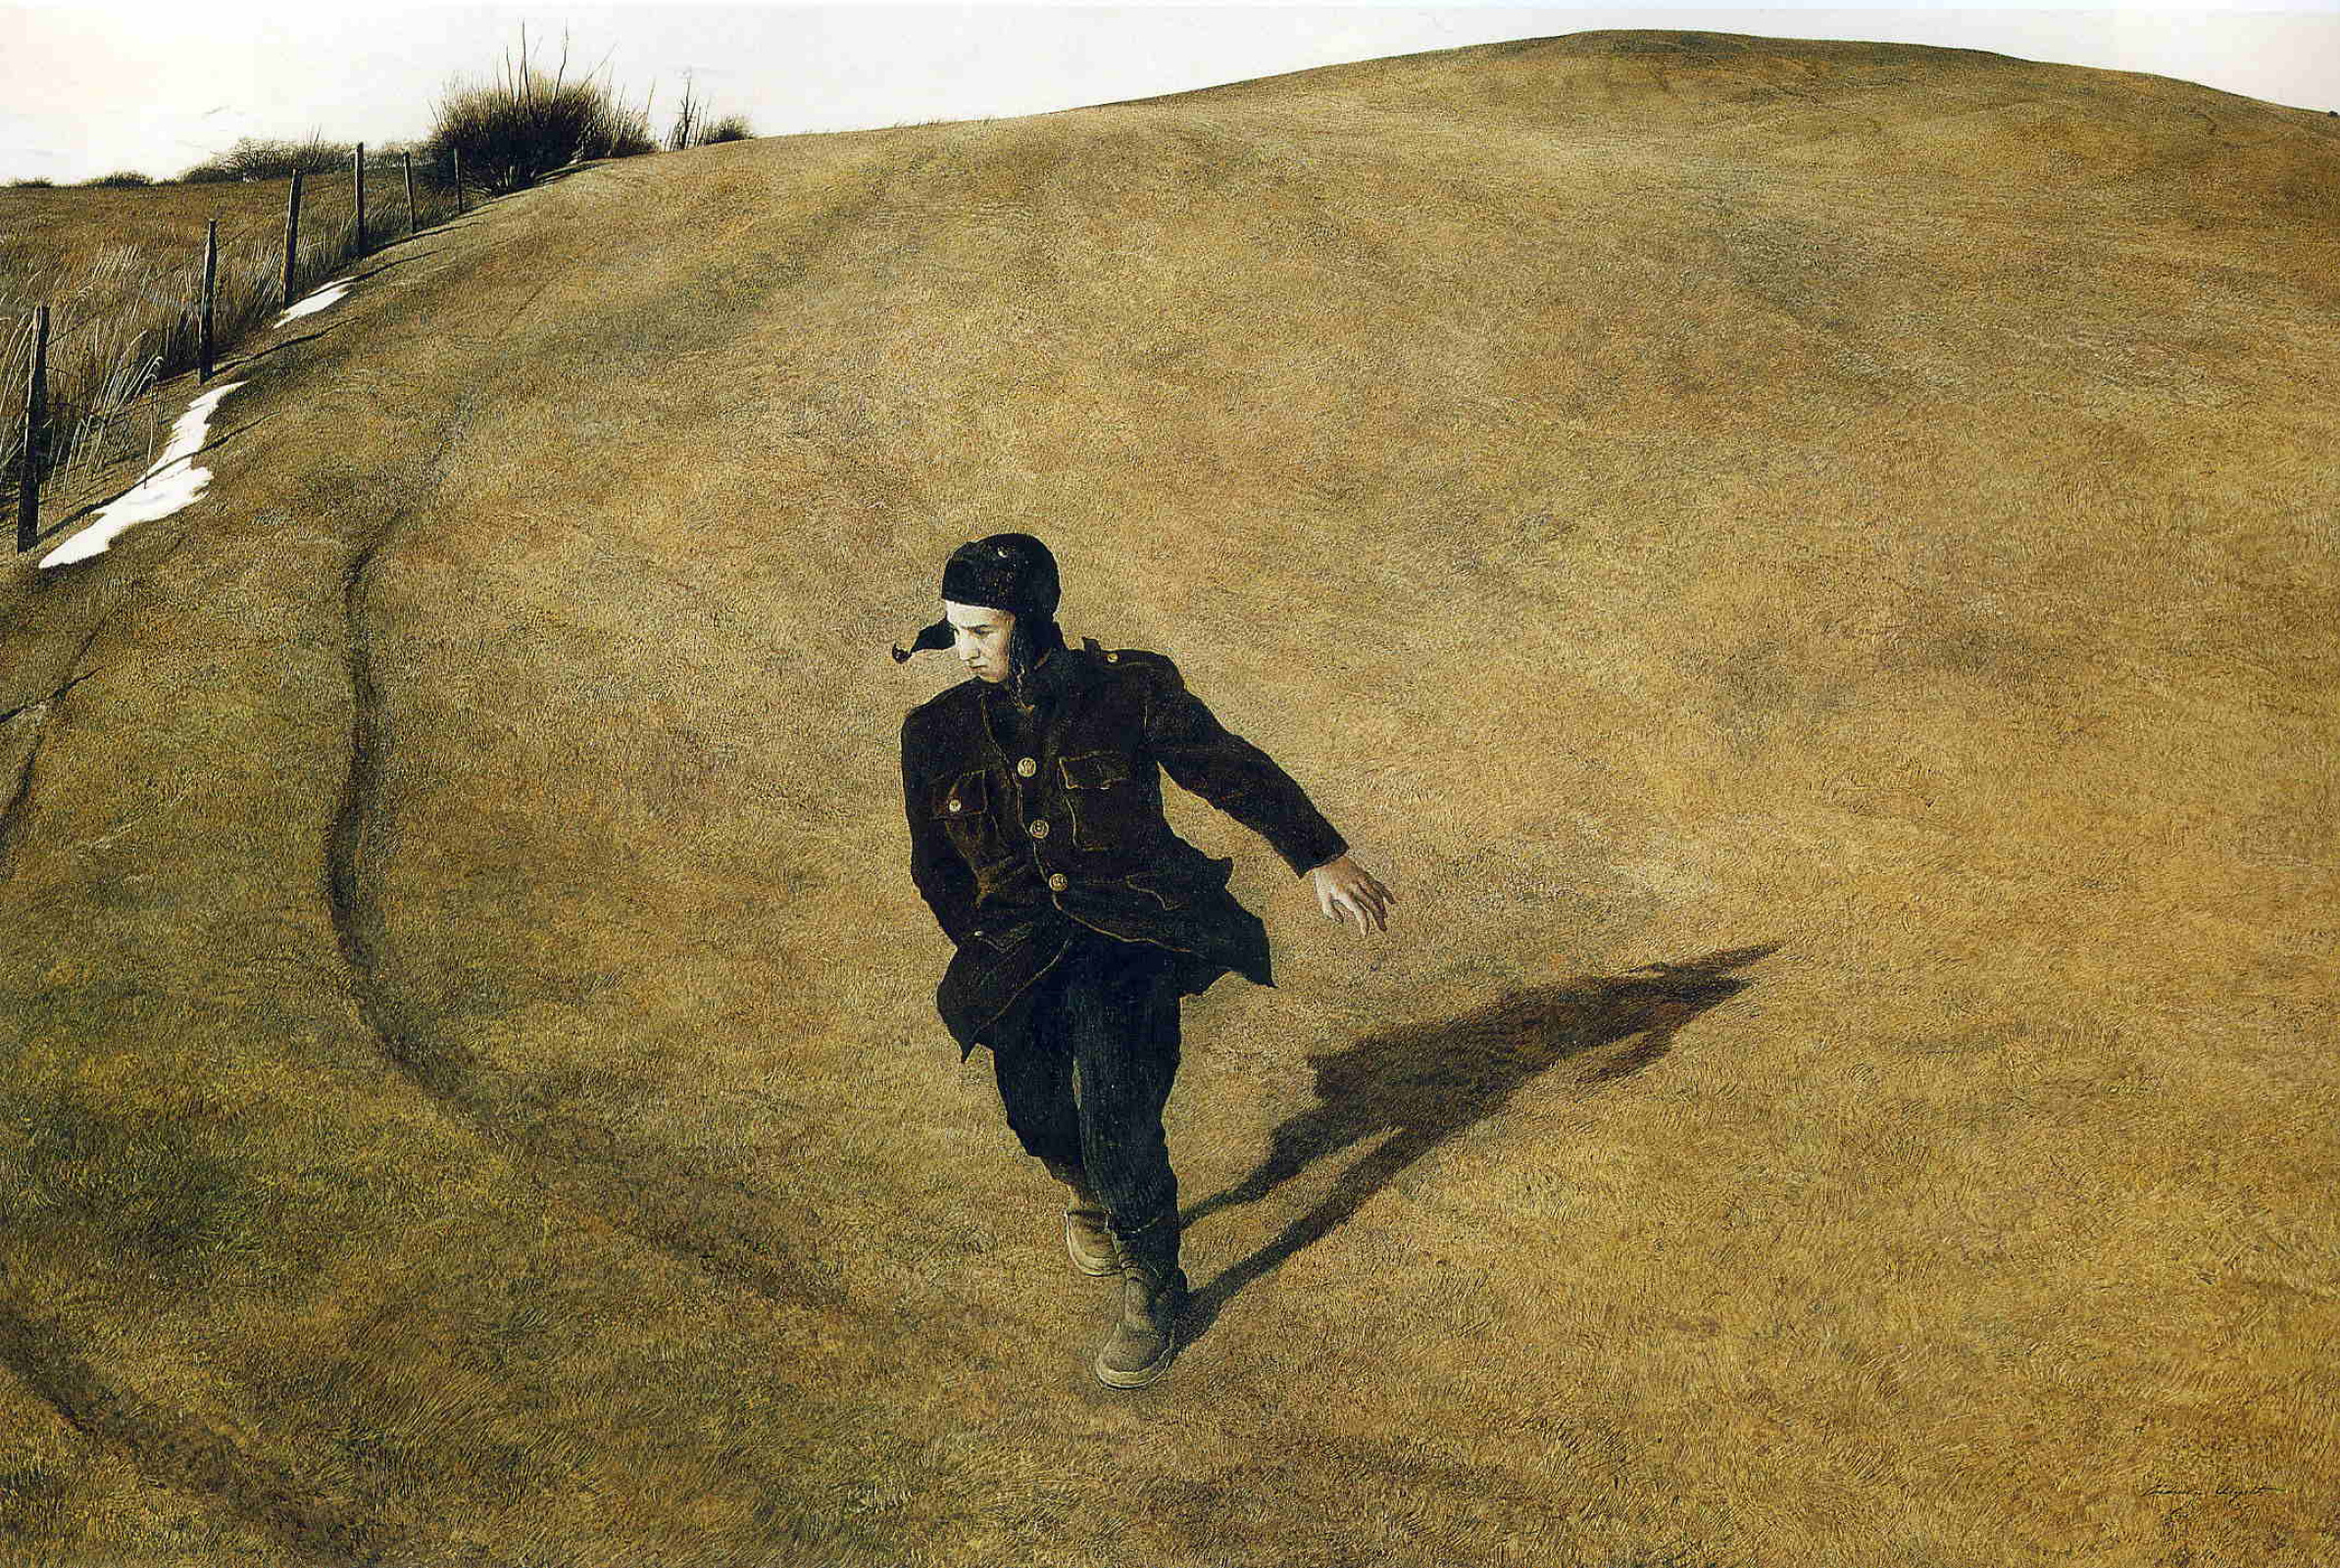 Notable works by Andrew Wyeth